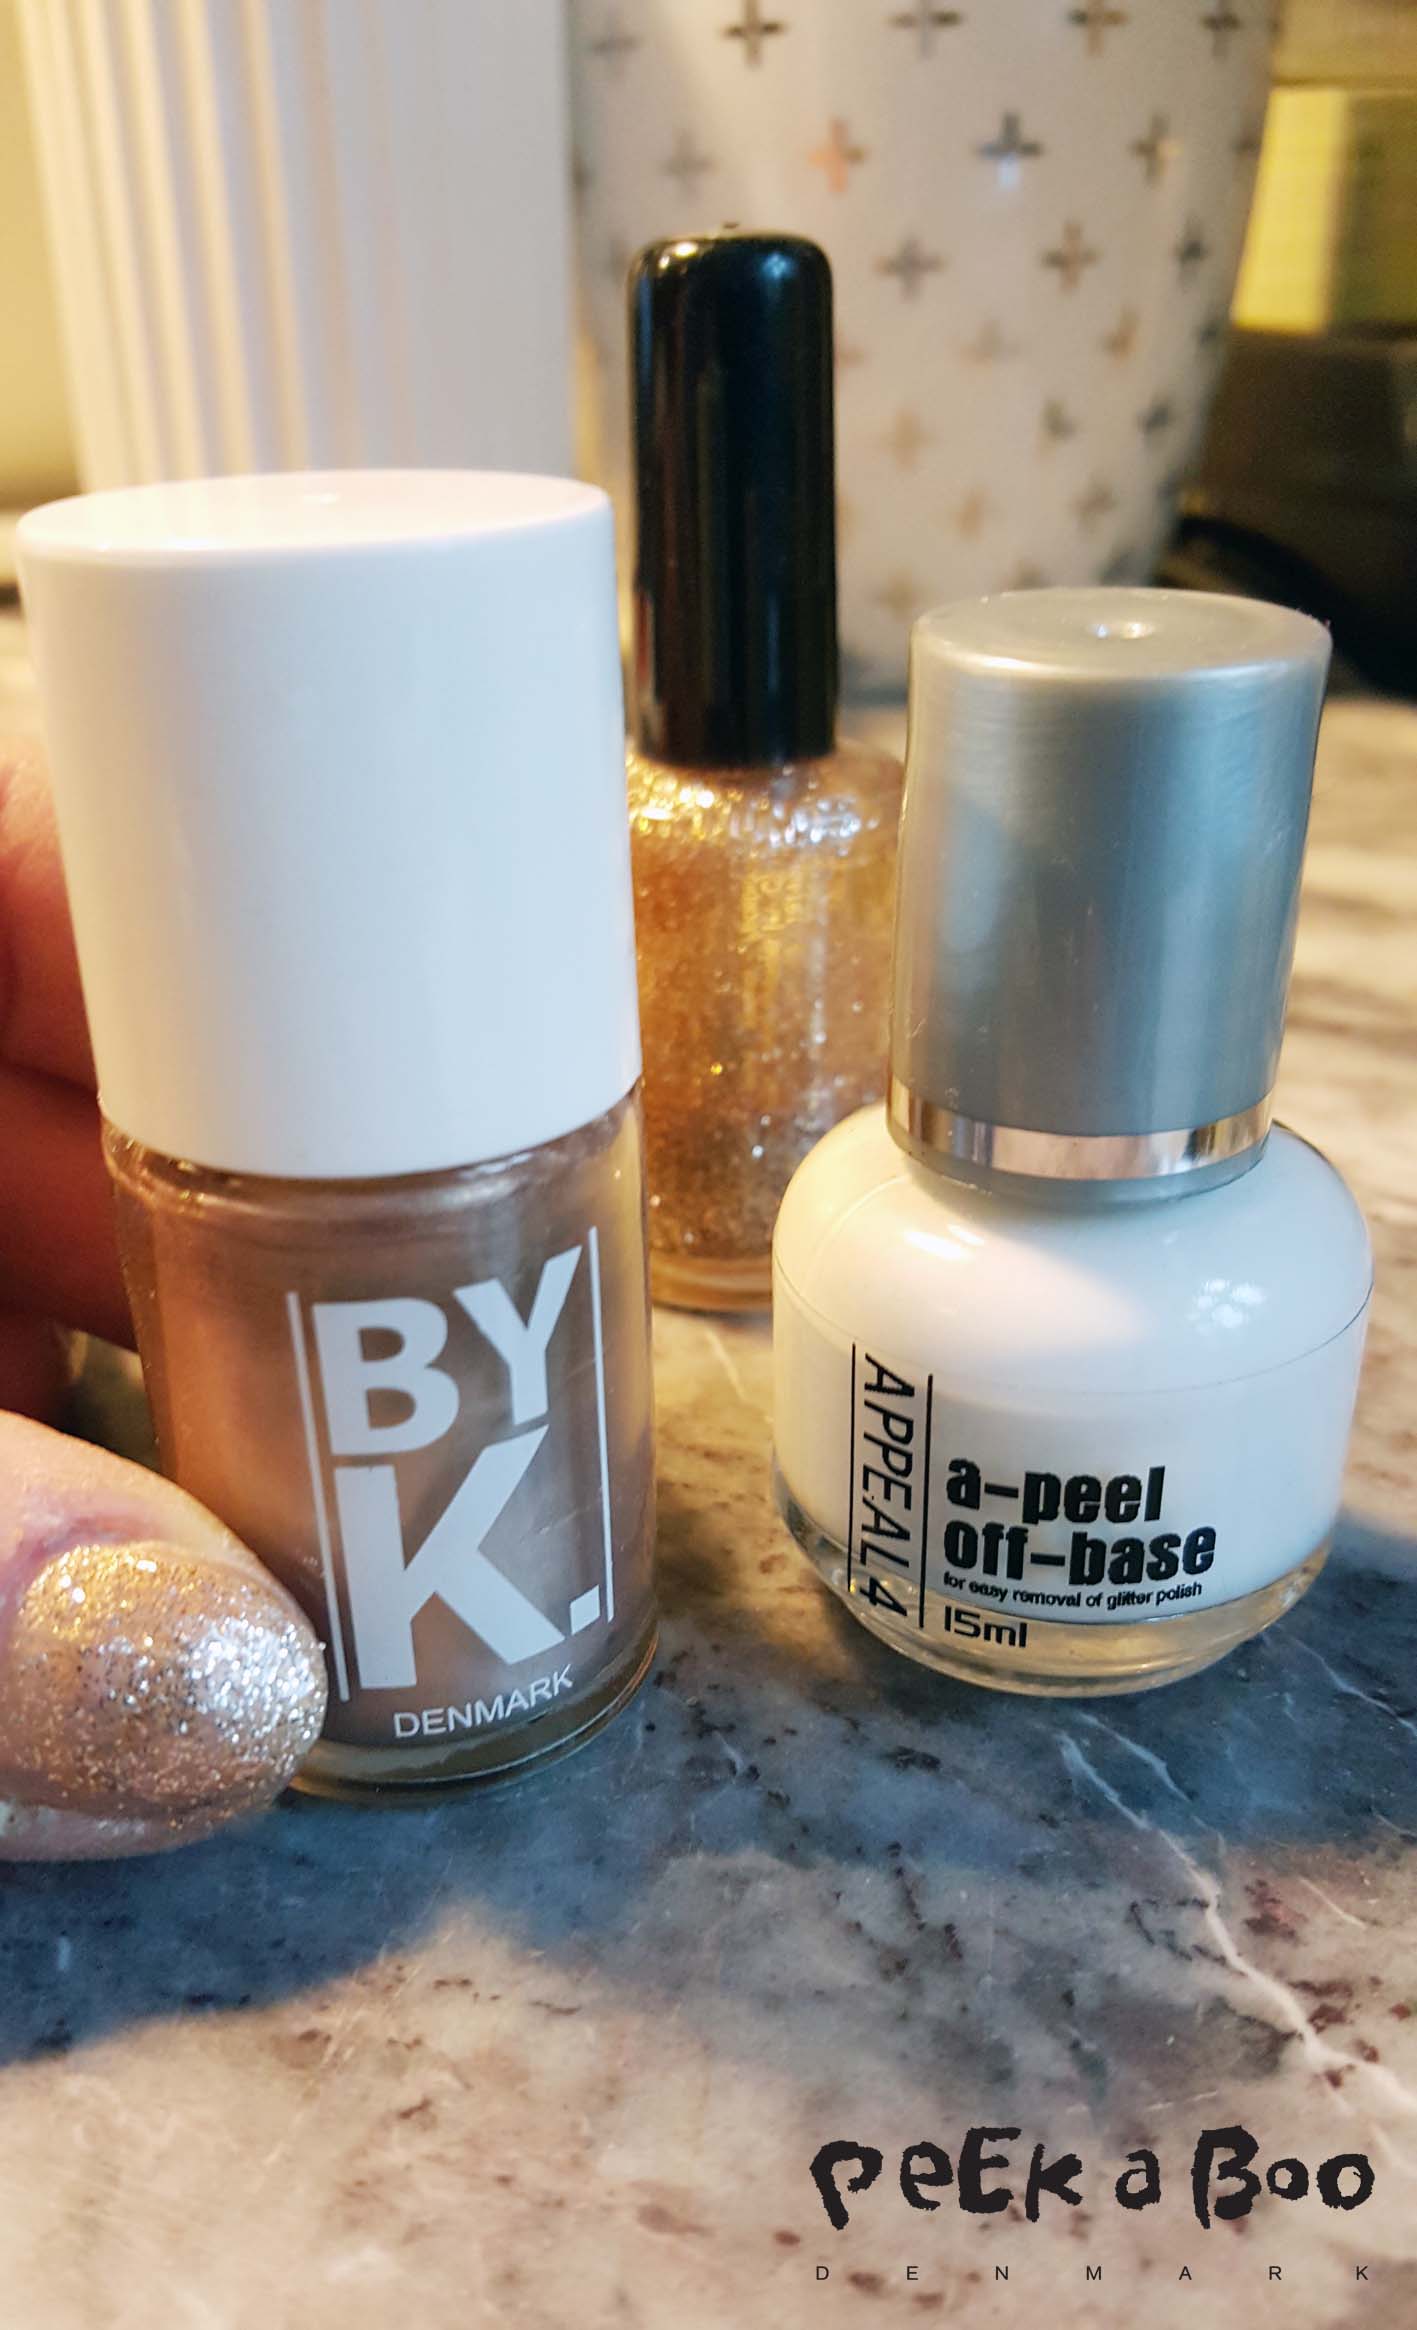 Copper nailpolish from Danish brand by K and peel-off base coat from Appeal4 also a Danish brand.